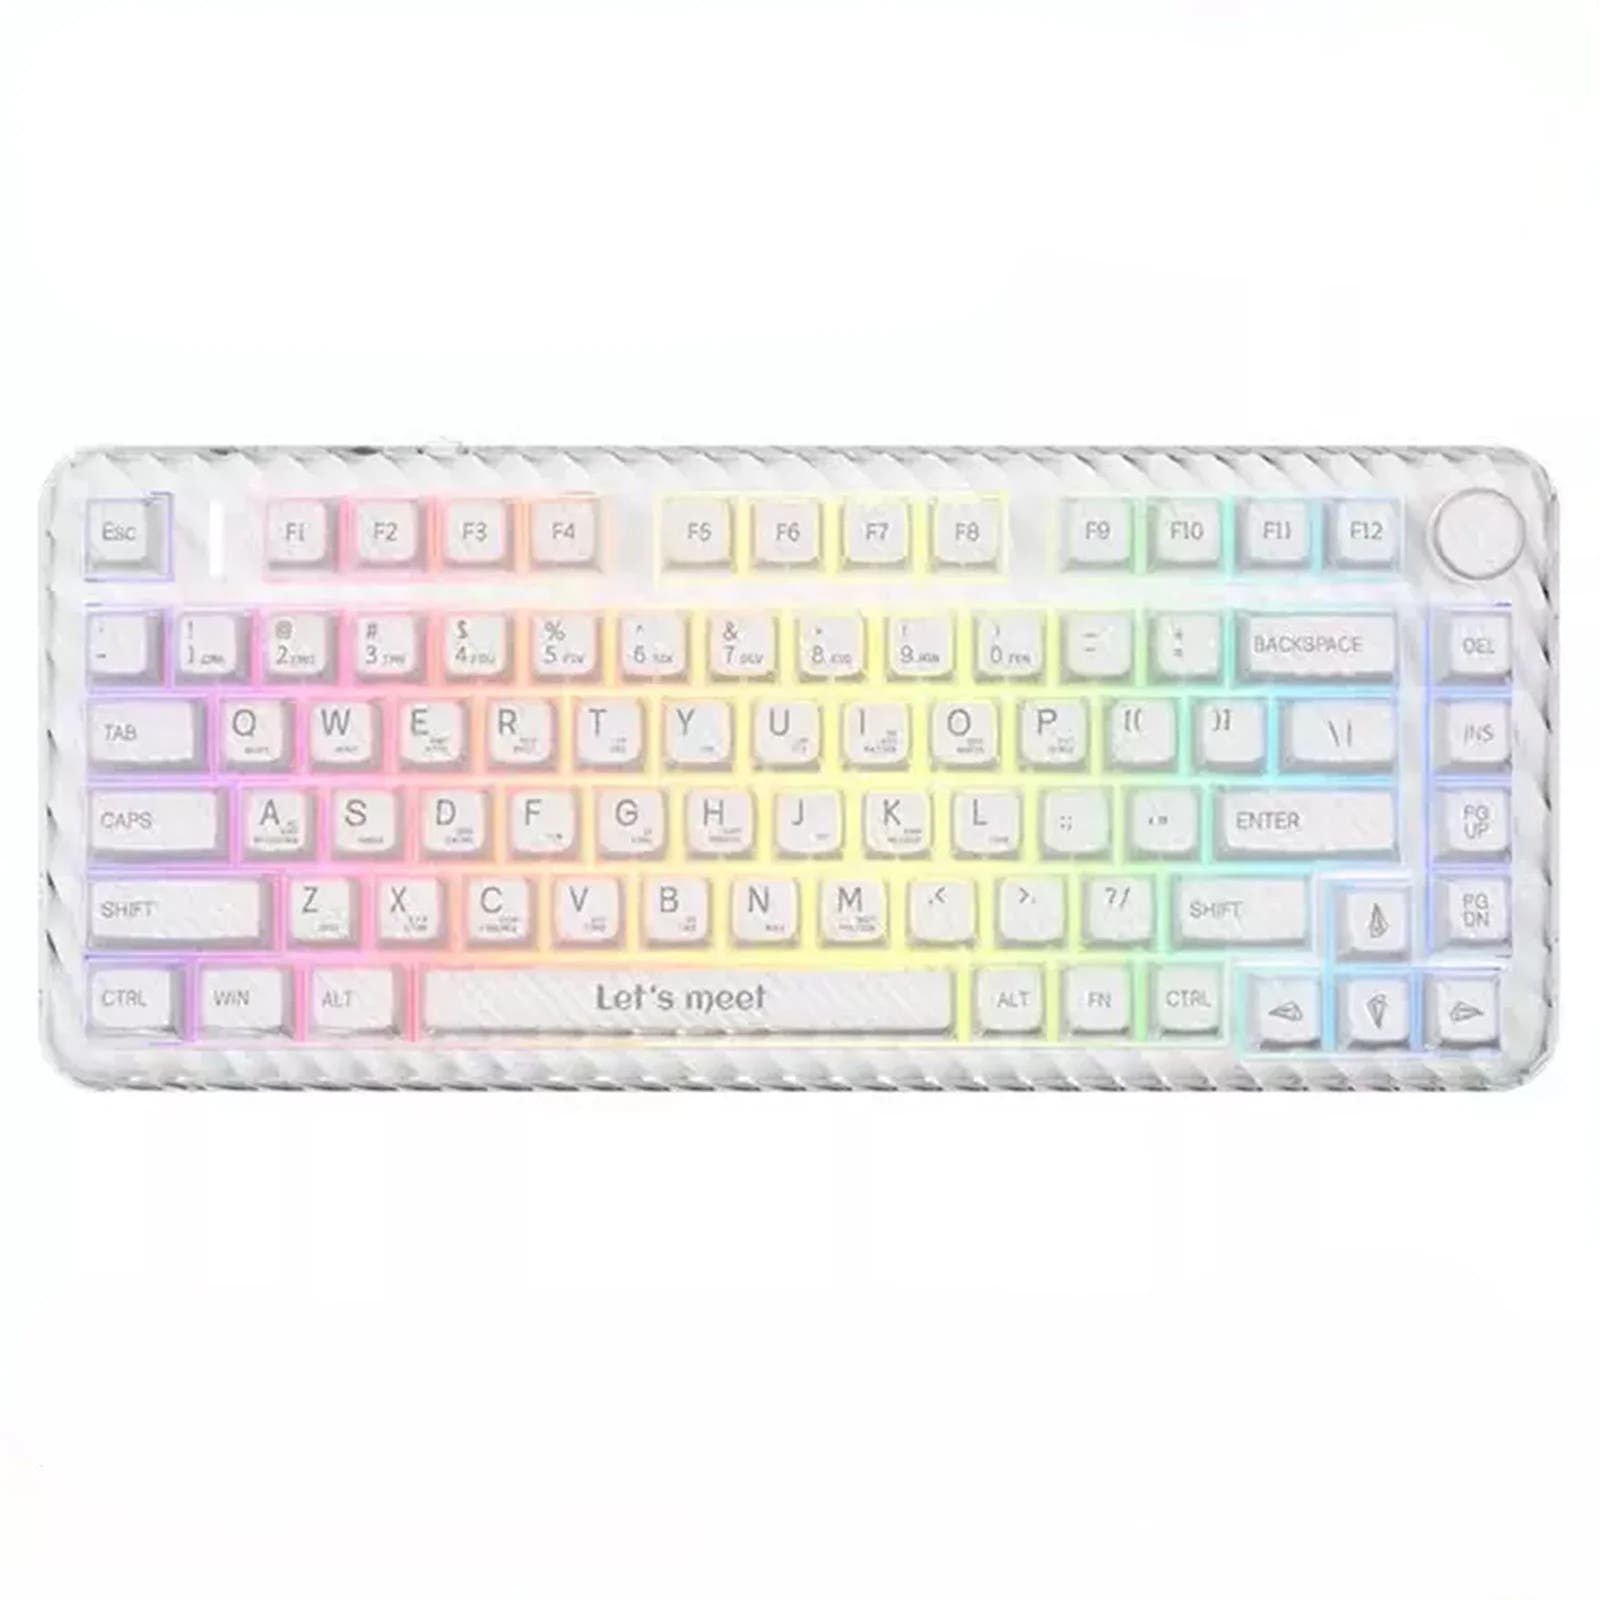 RX S75  Crystal White Tri-mode mechanical keyboard RX switch